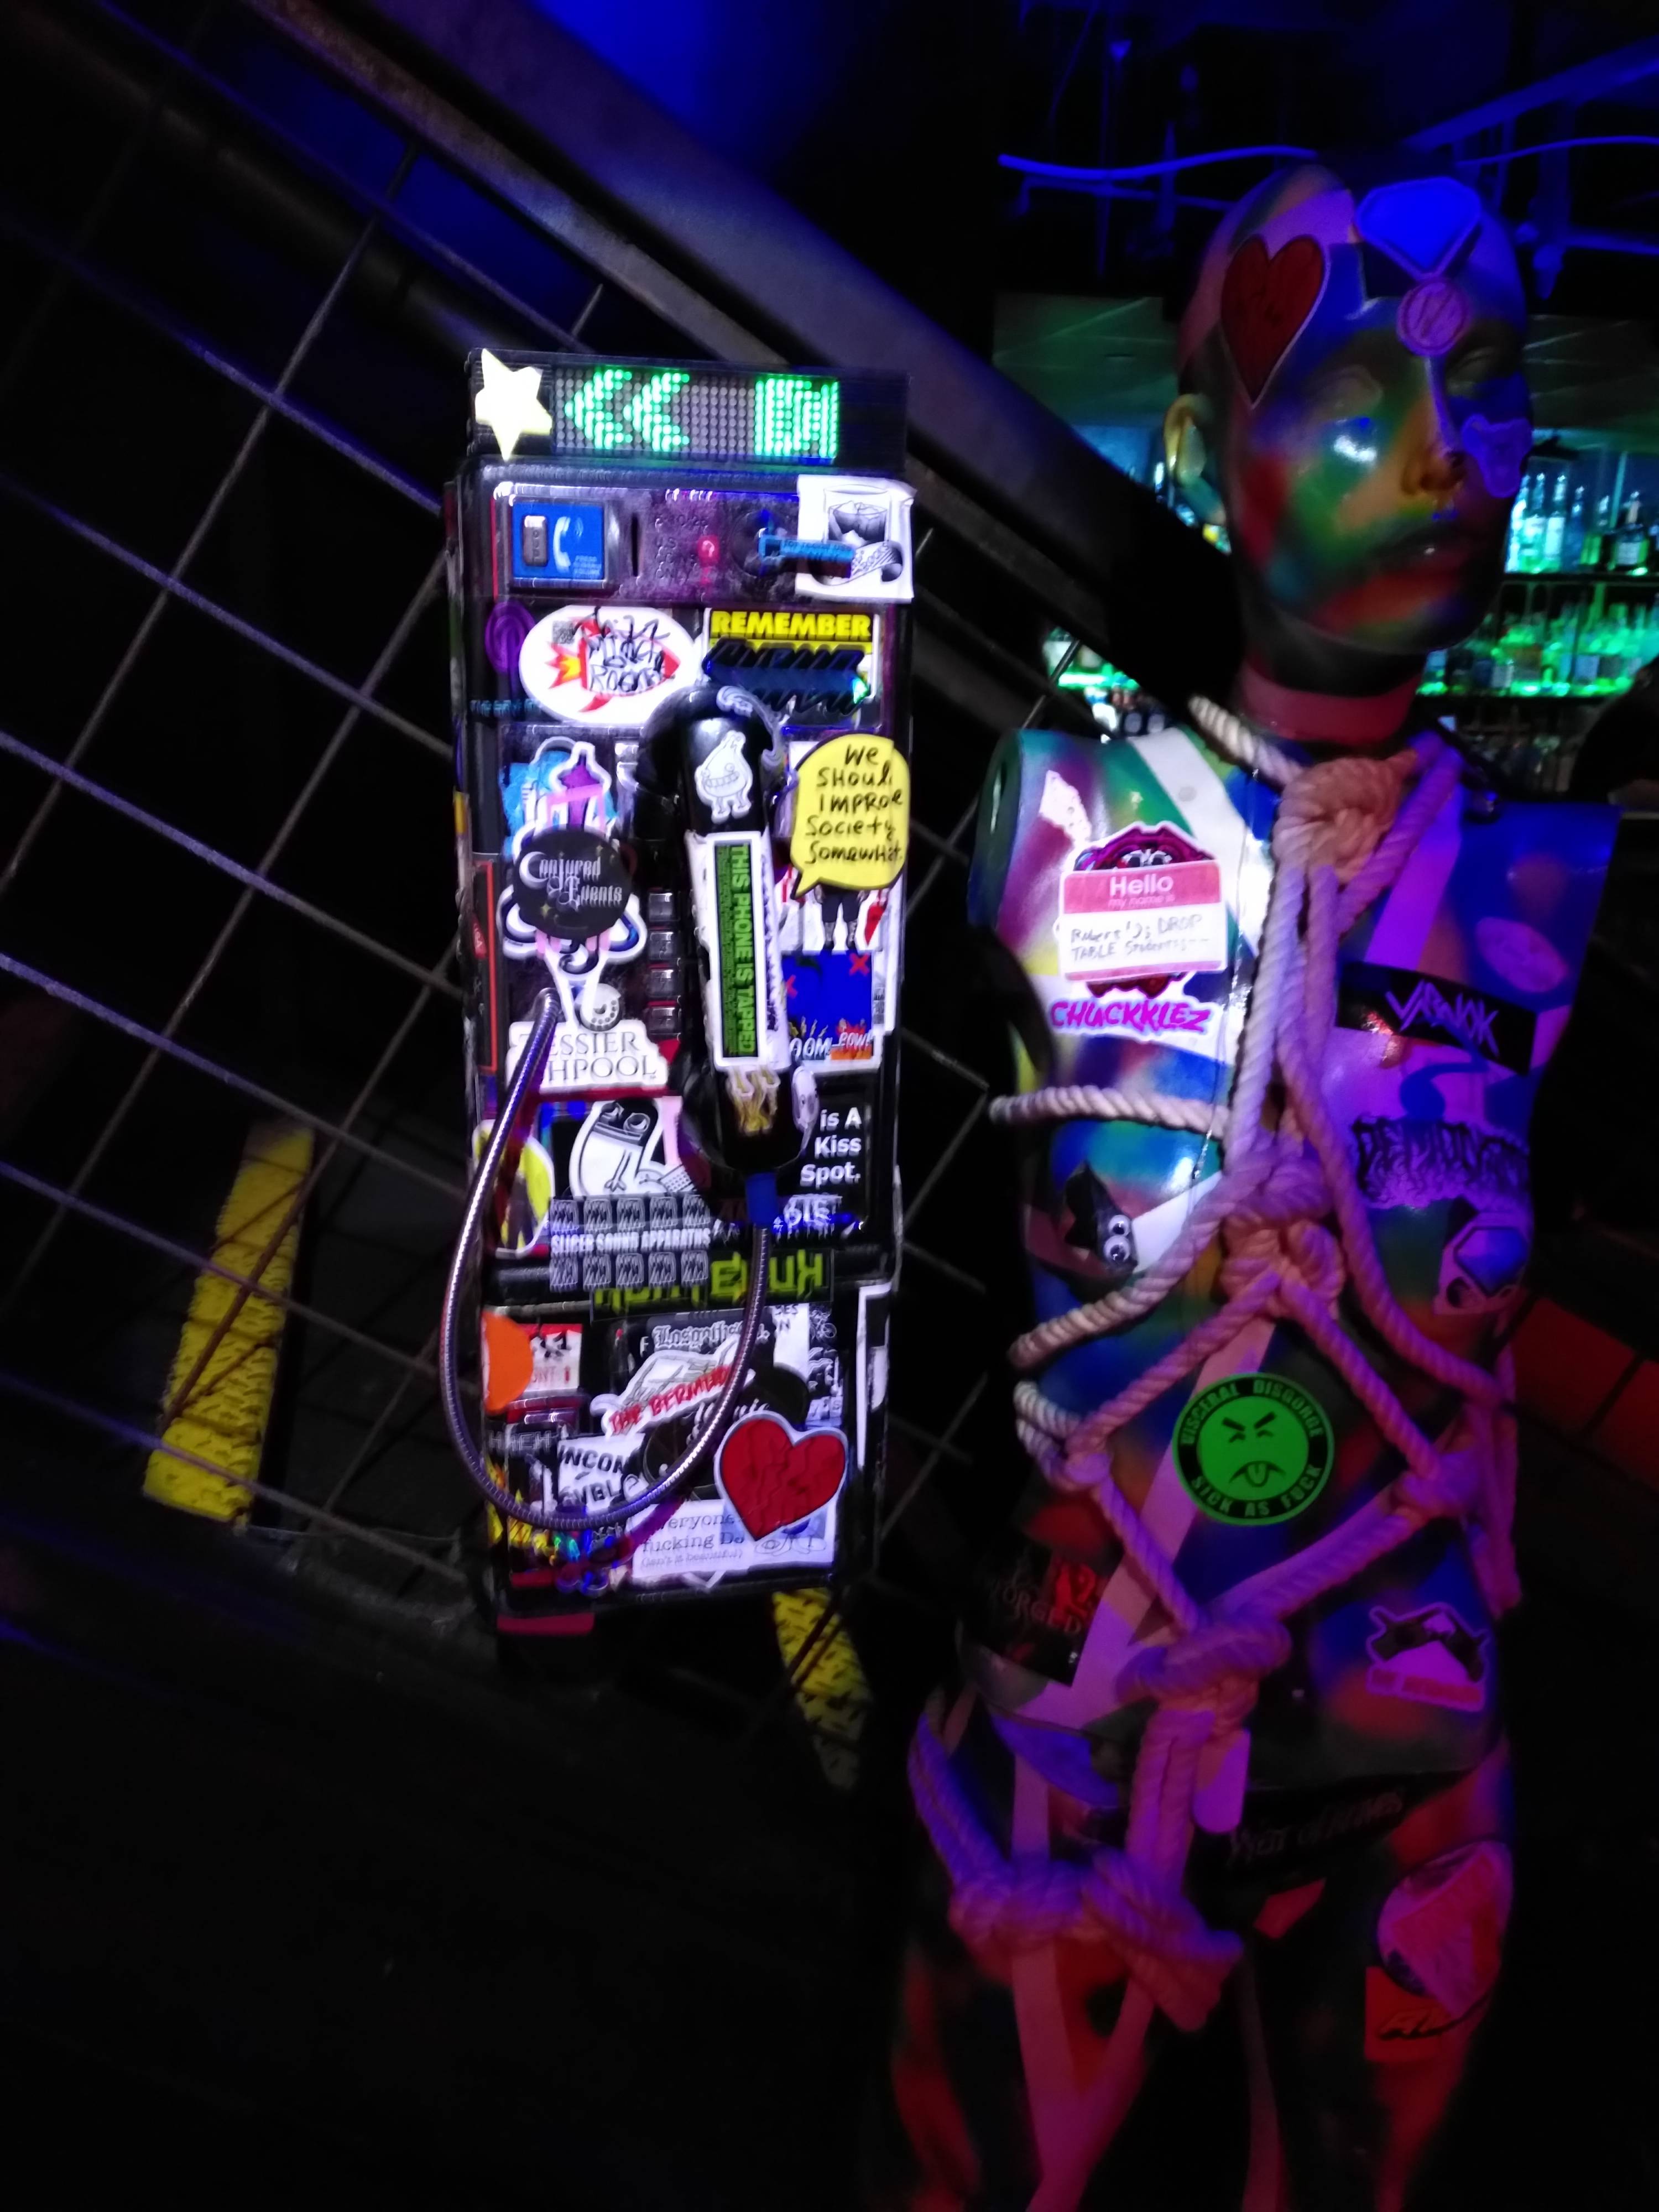 An american payphone covered in stickers in neon light. Beside it is a painted mannequin with some shibari going on.